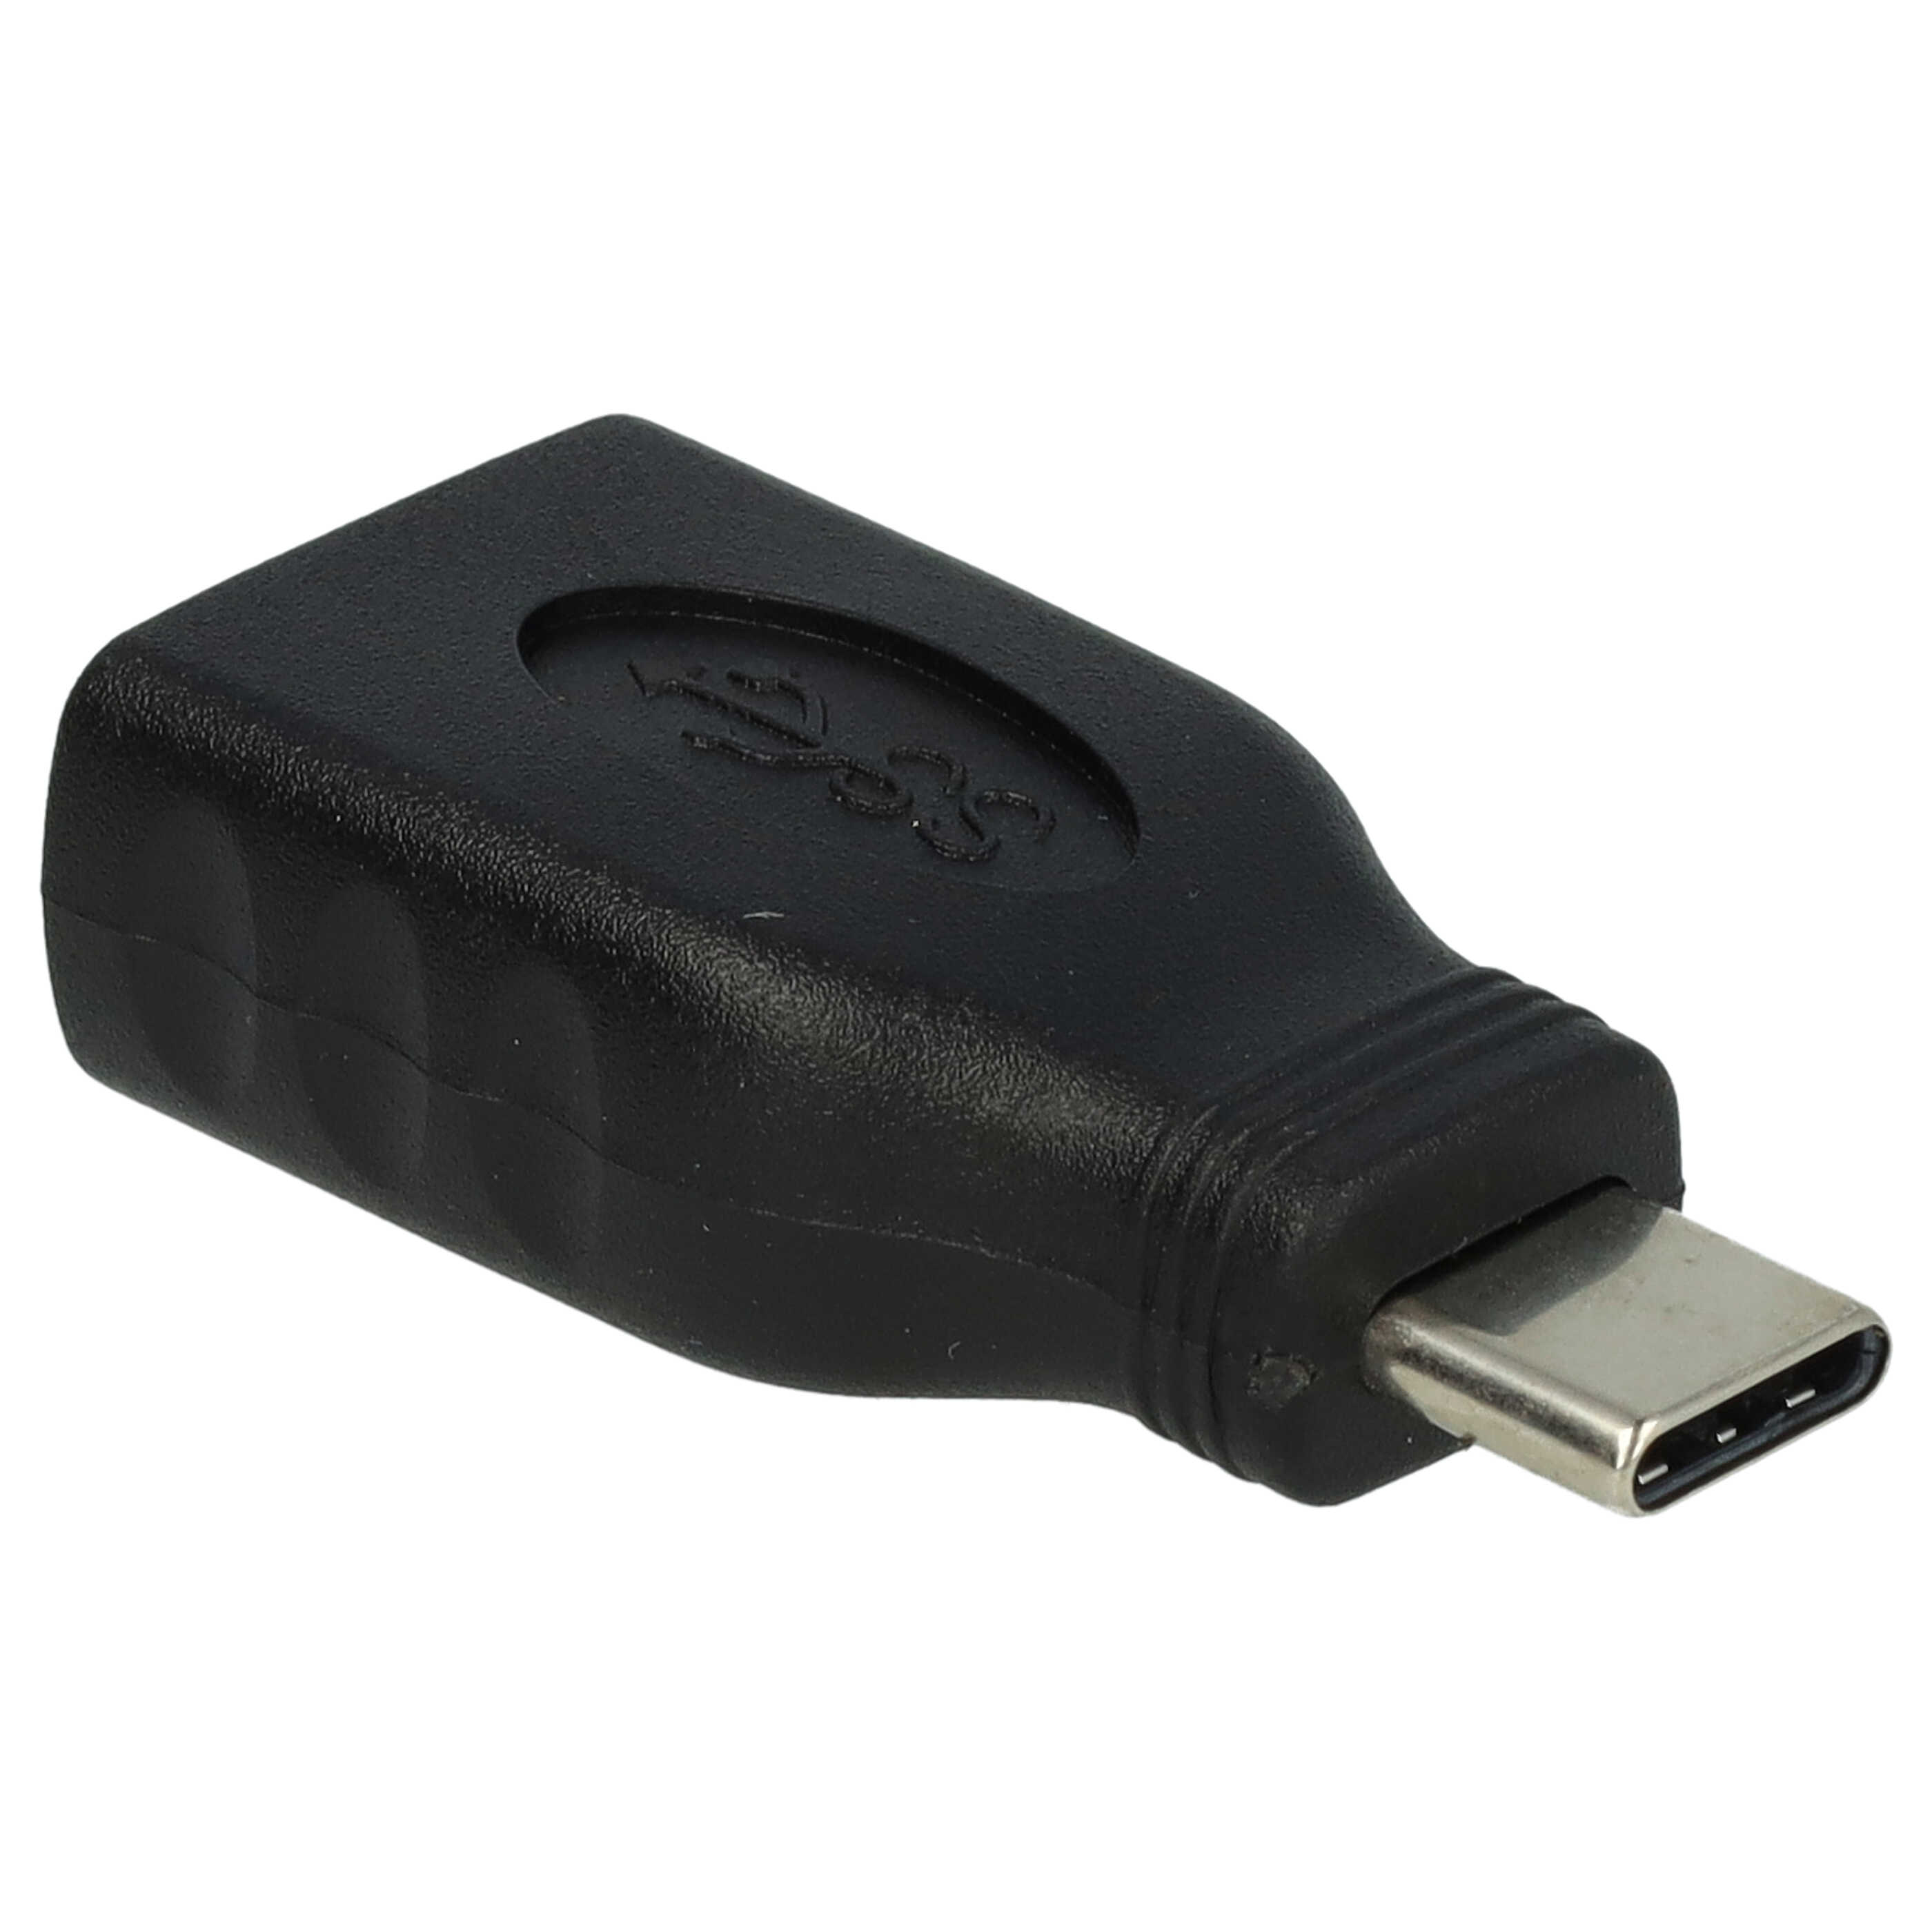 Adapter USB Type C to USB 3.0 suitable for P9 Huawei - USB Adapter Black